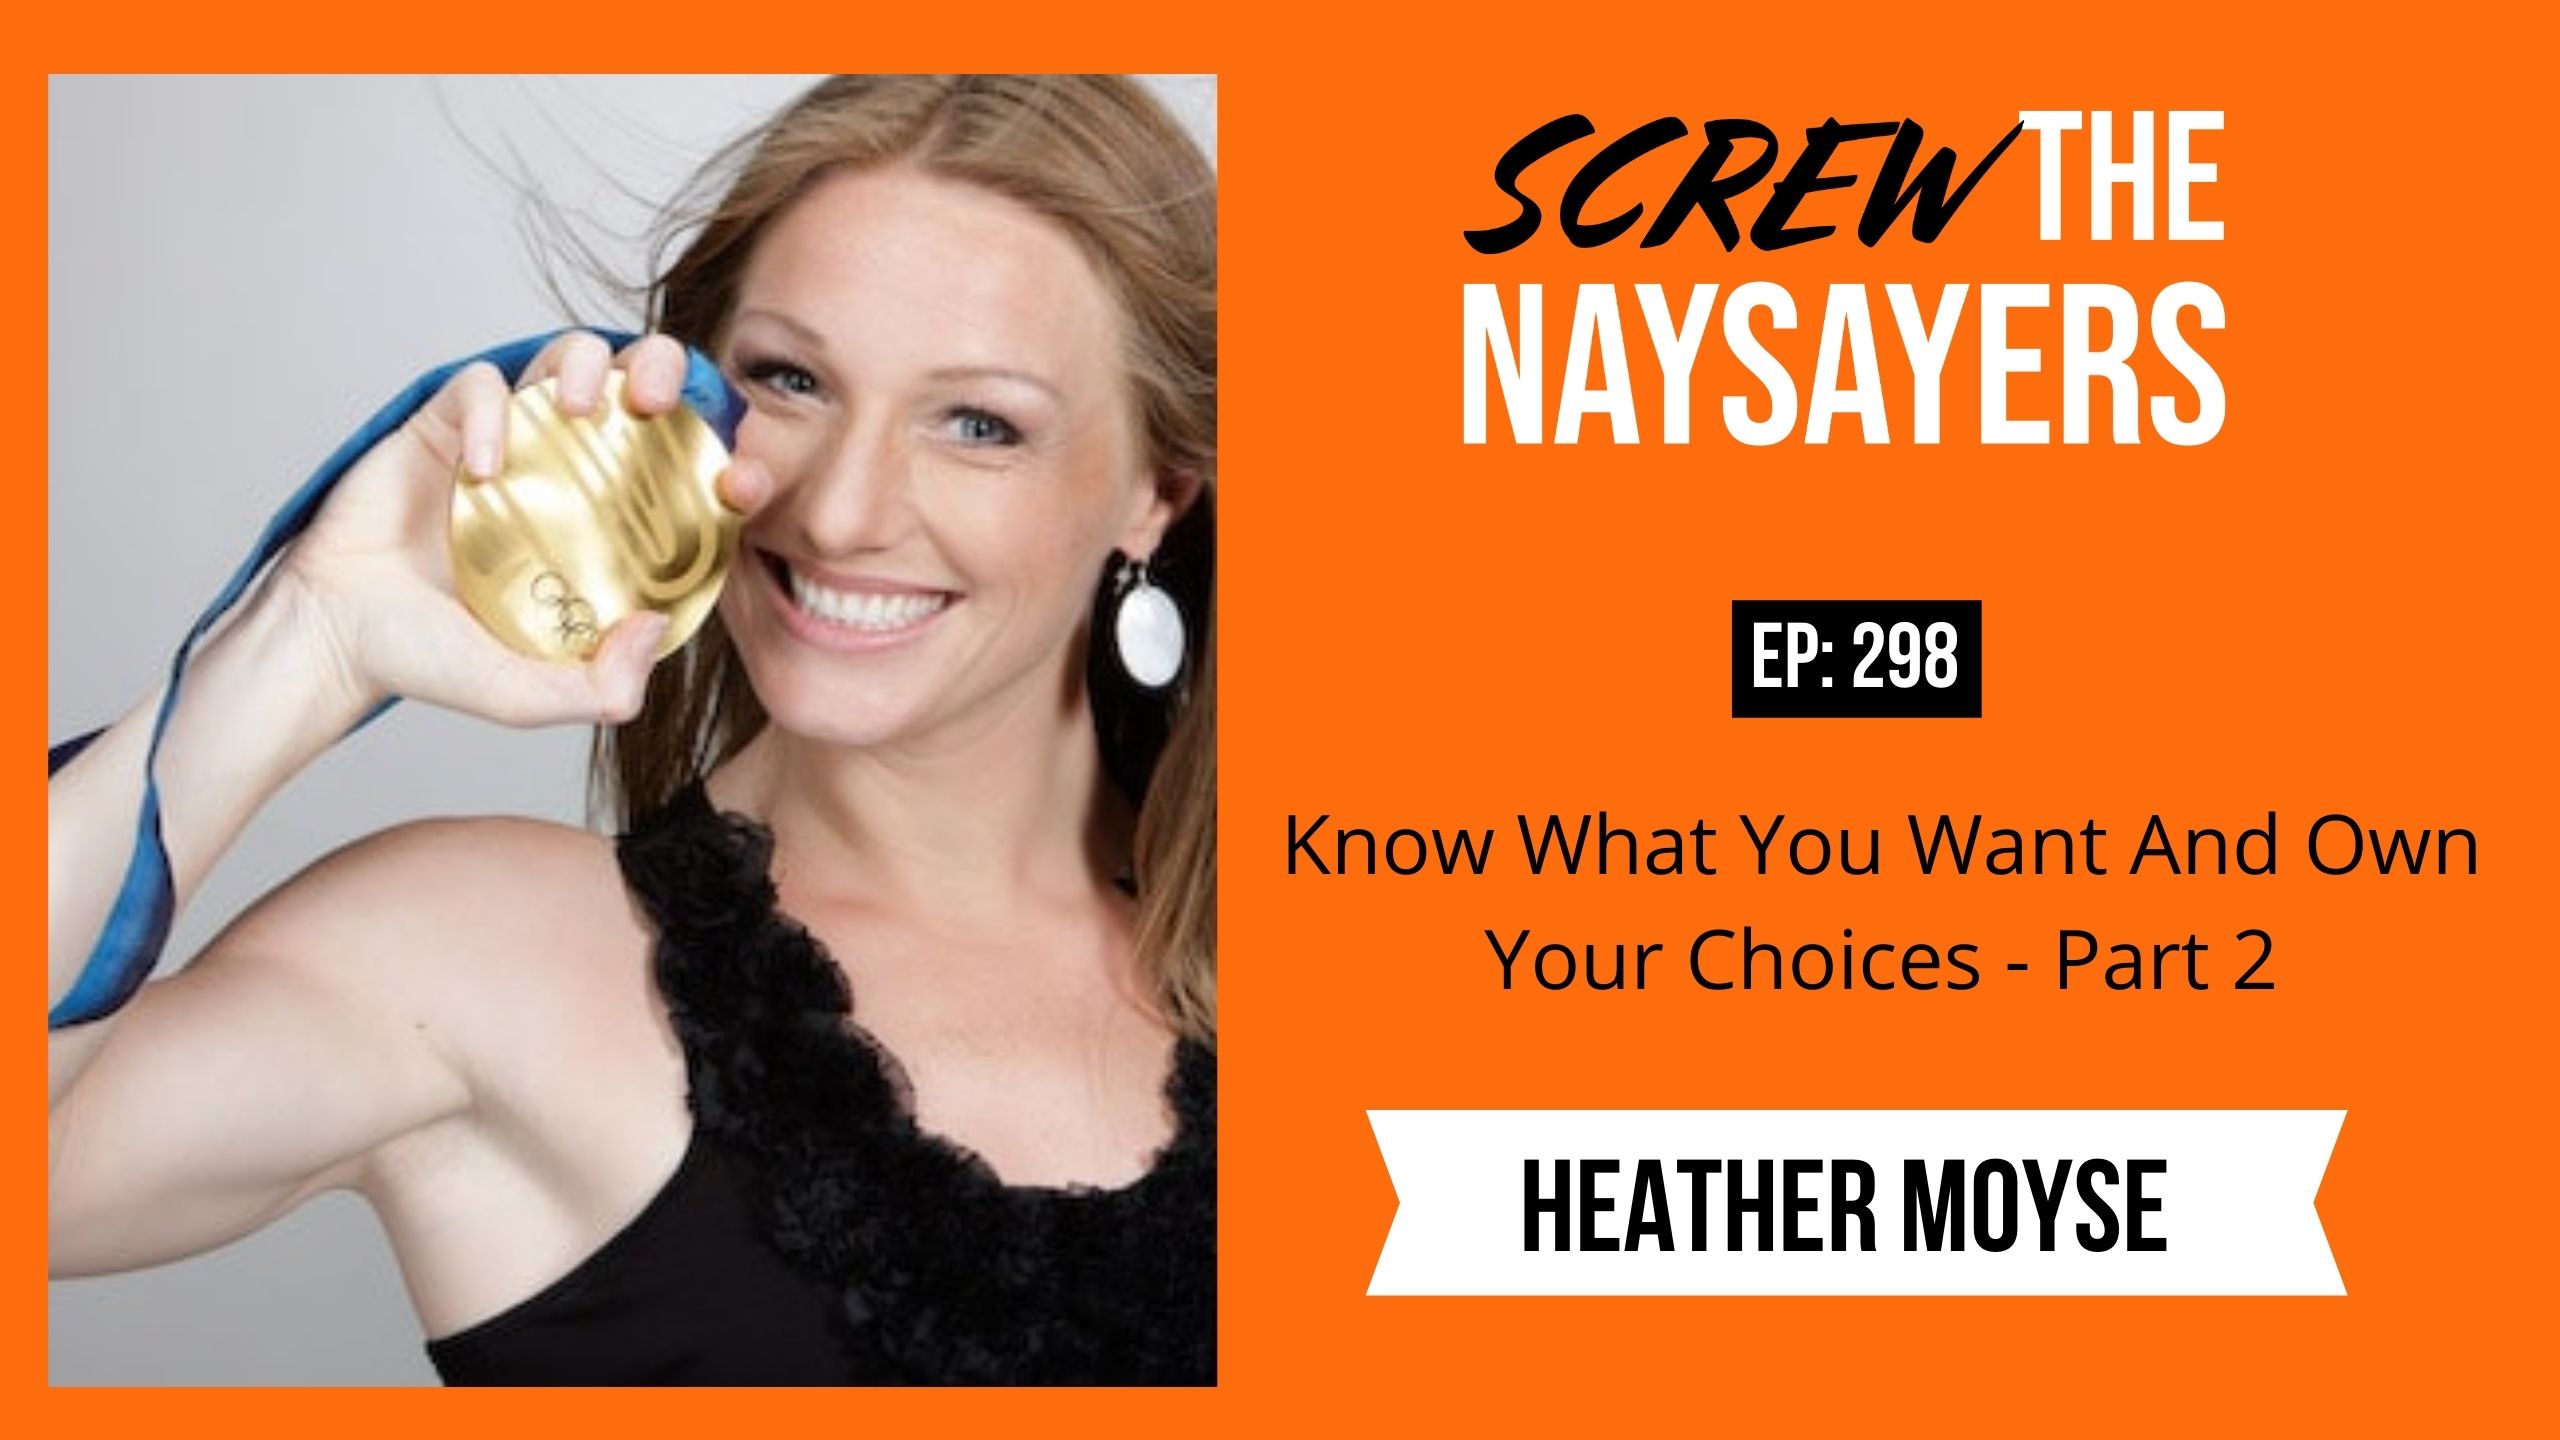 Know What You Want And Own Your Choices | Heather Moyse - Part 2